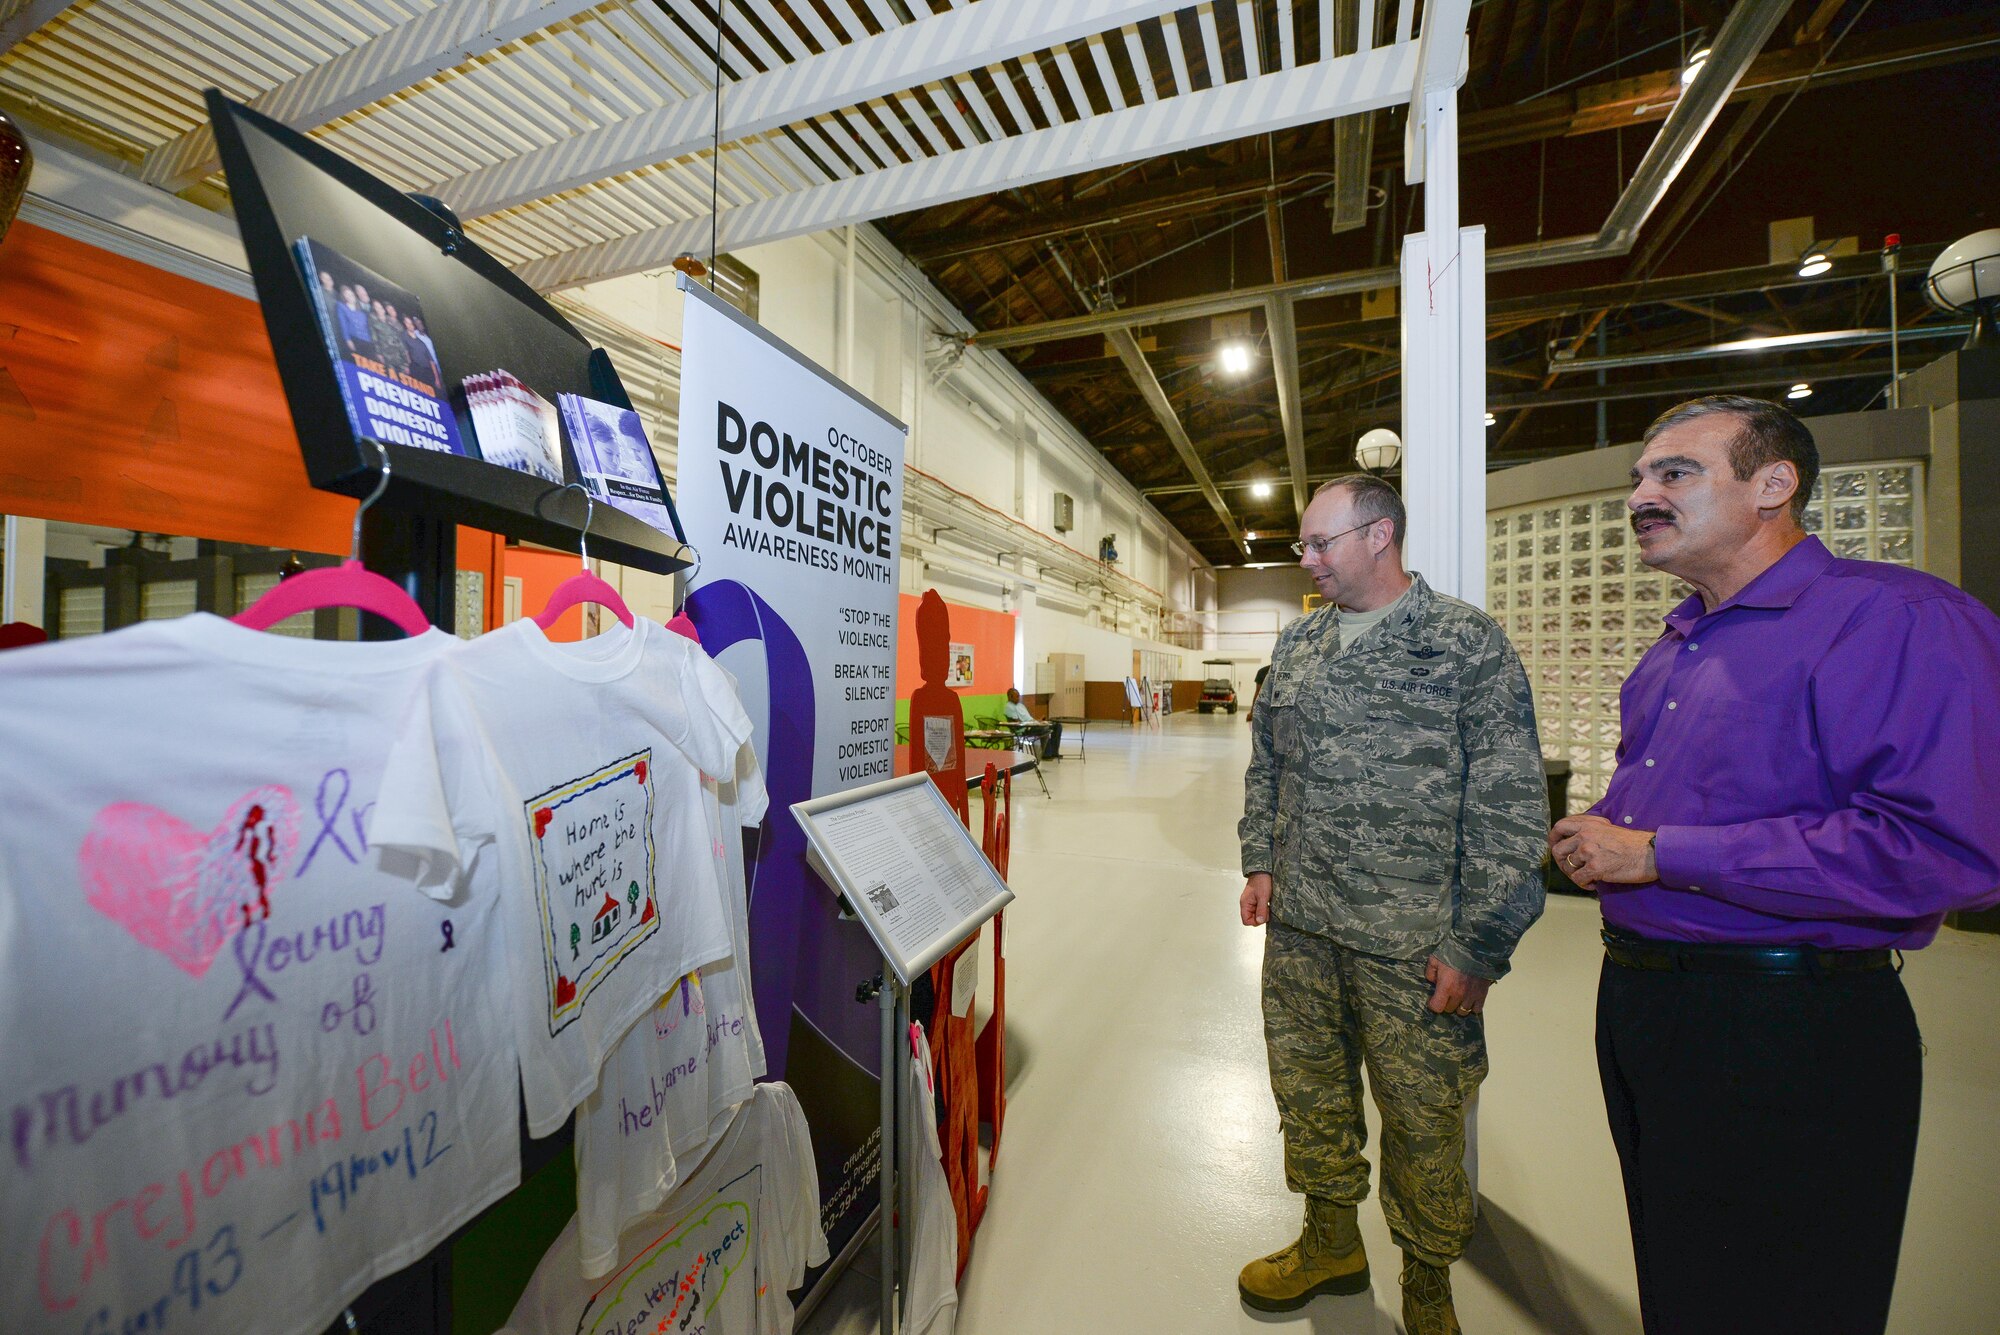 U.S. Air Force Col. David Berg (left), 55th Wing vice commander, talks with Kenneth Komyathy, family advocacy director, about the display set up to support Domestic Violence Awareness month in the Offutt Field House at Offutt Air Force Base, Neb., Oct. 18, 2016. According to the Department of Defense, domestic violence is an offense under the United States Code, the Uniform Code of Military Justice or state law that involves the use, attempted use, threat, use of force, violence against a person who is a current or former spouse, a person who shares a child with the abuser, a current or former intimate partner with whom the abuser shares a common domicile. (U.S. Air Force photo by Zachary Hada/Released)